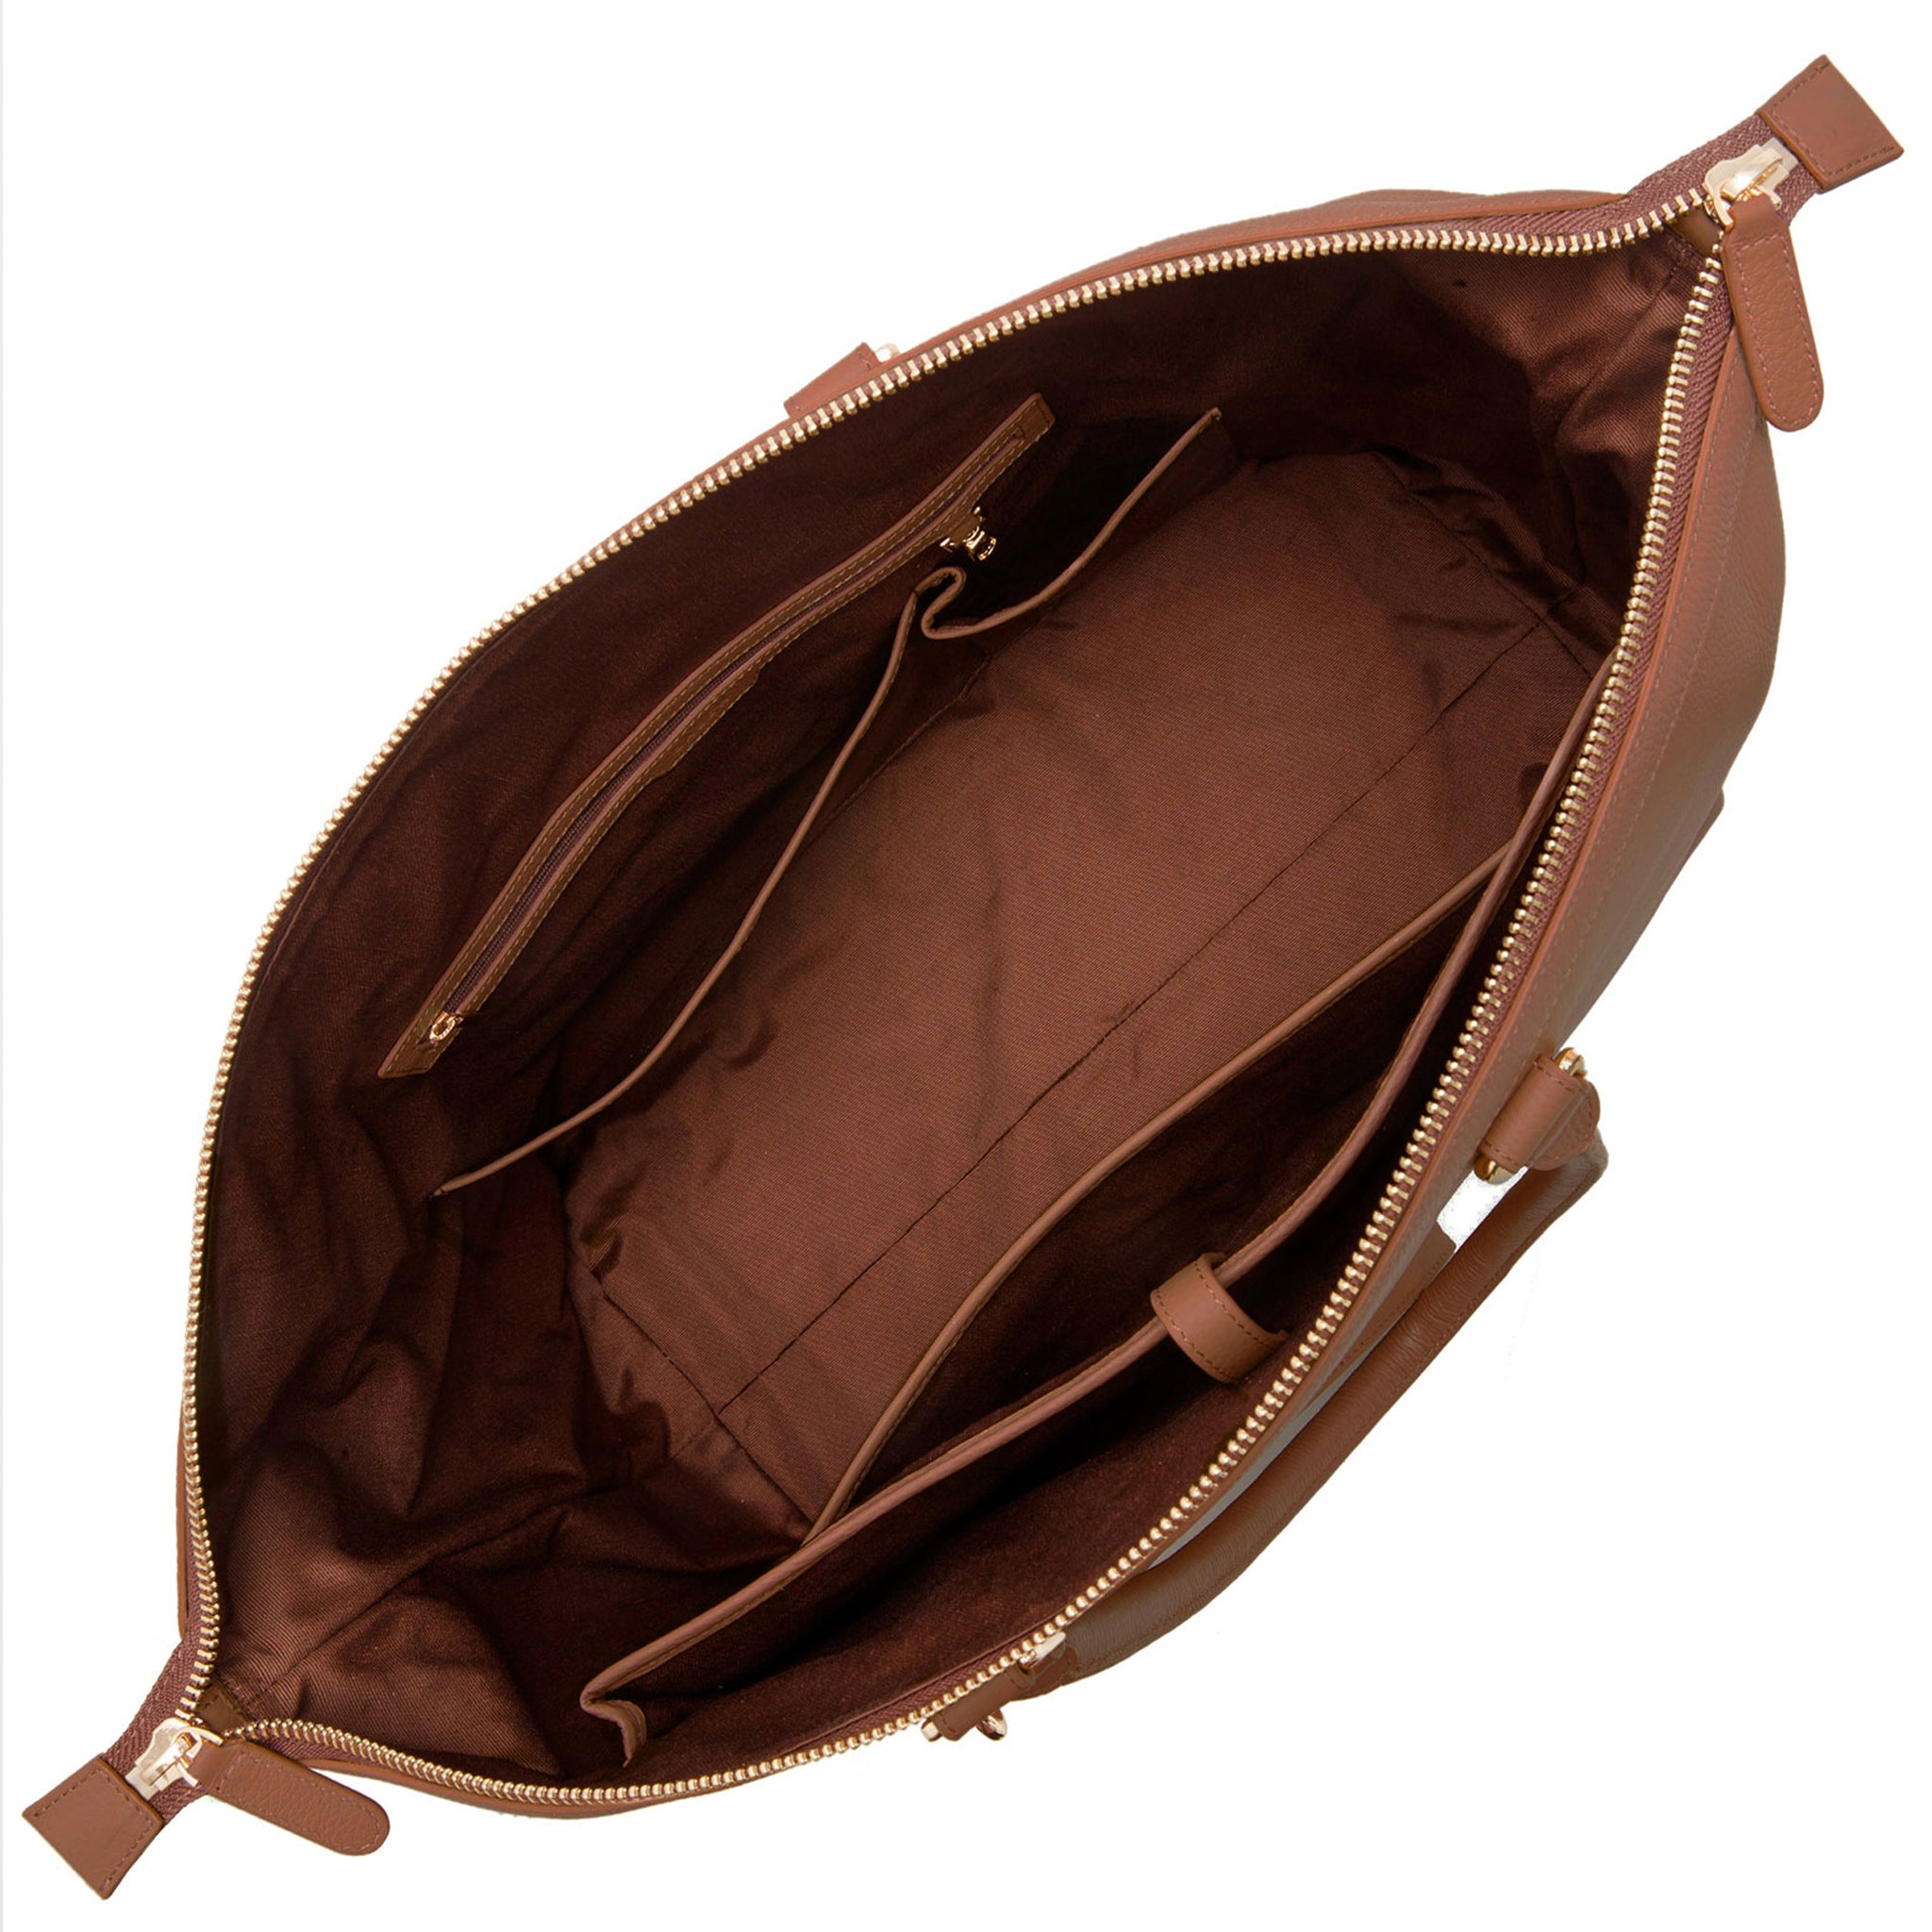 Saben Roma Carry-All Bag - Nutshell